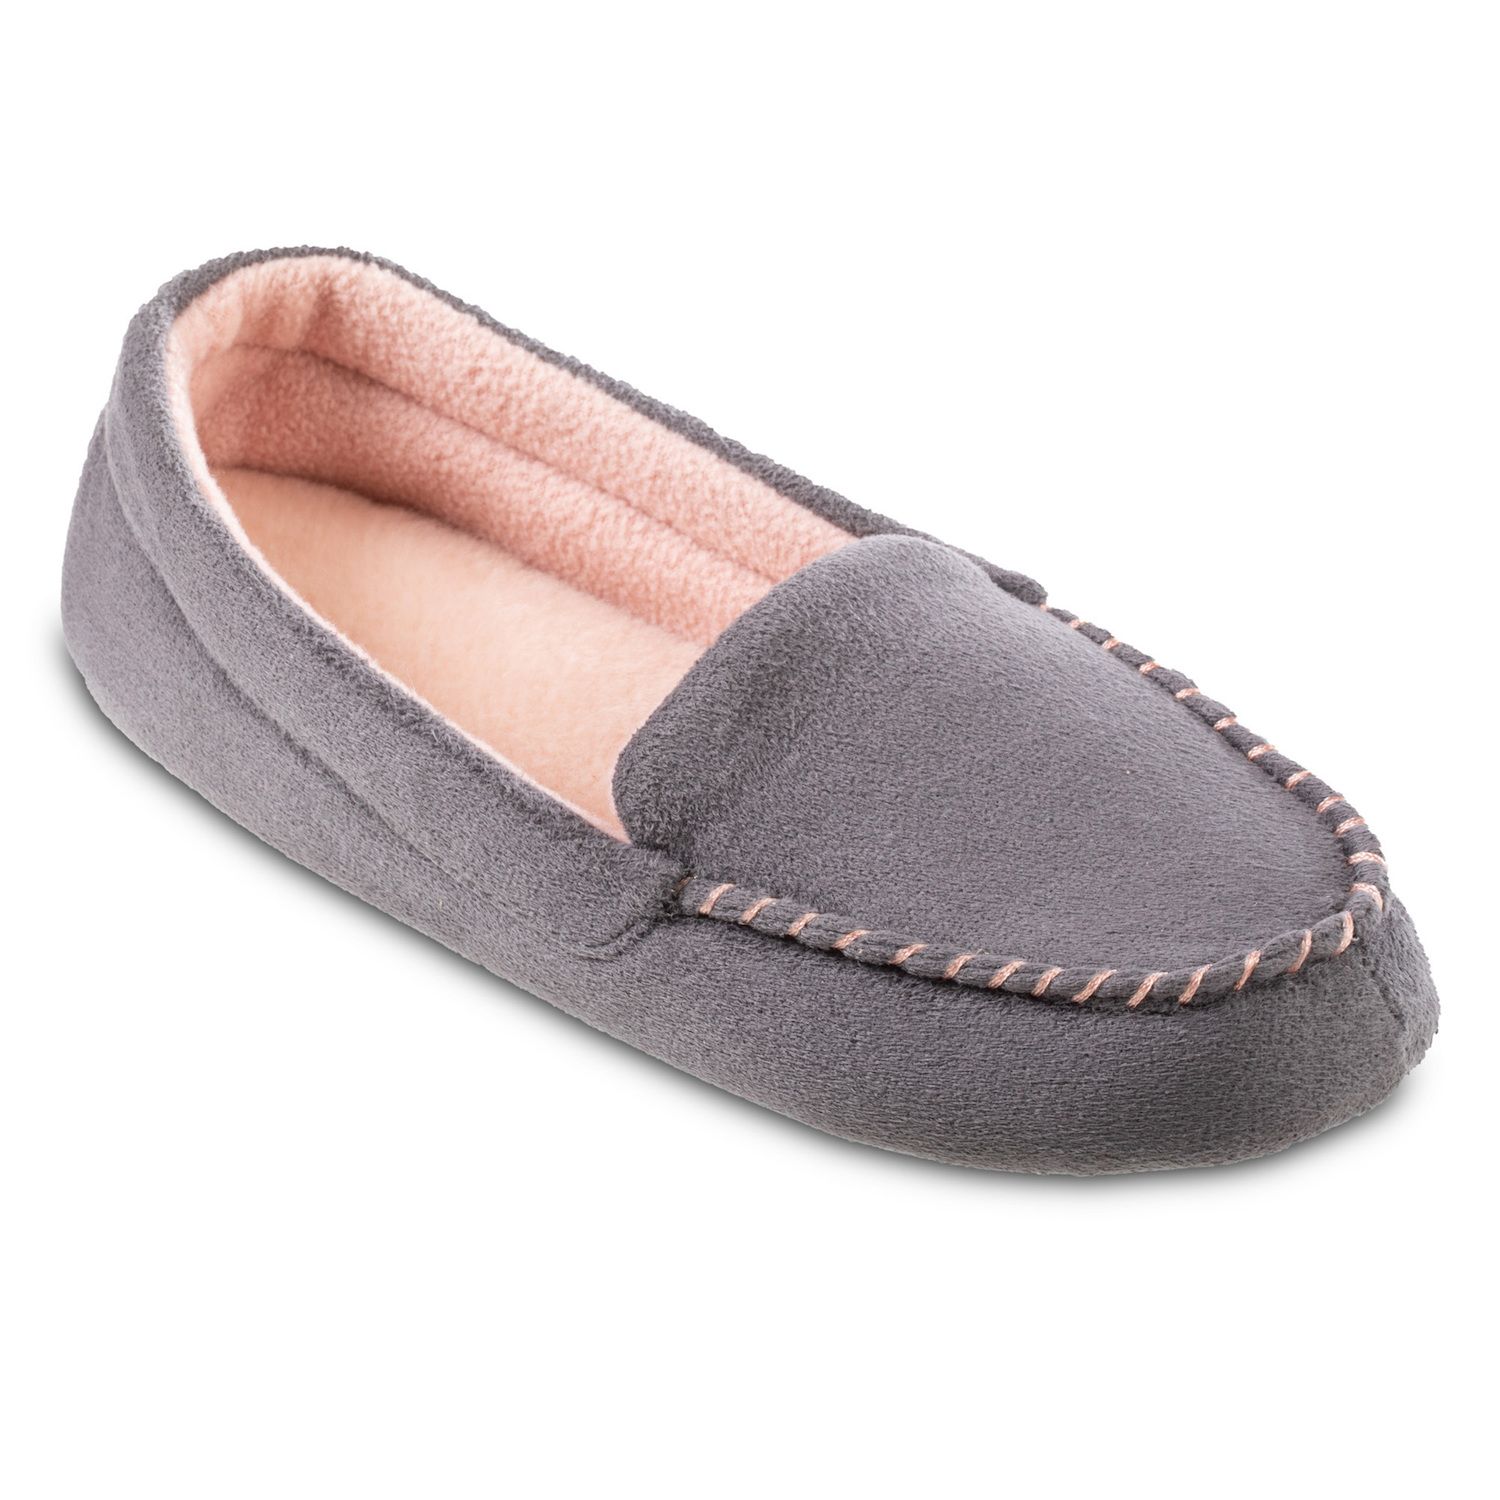 isotoner moccasin slippers